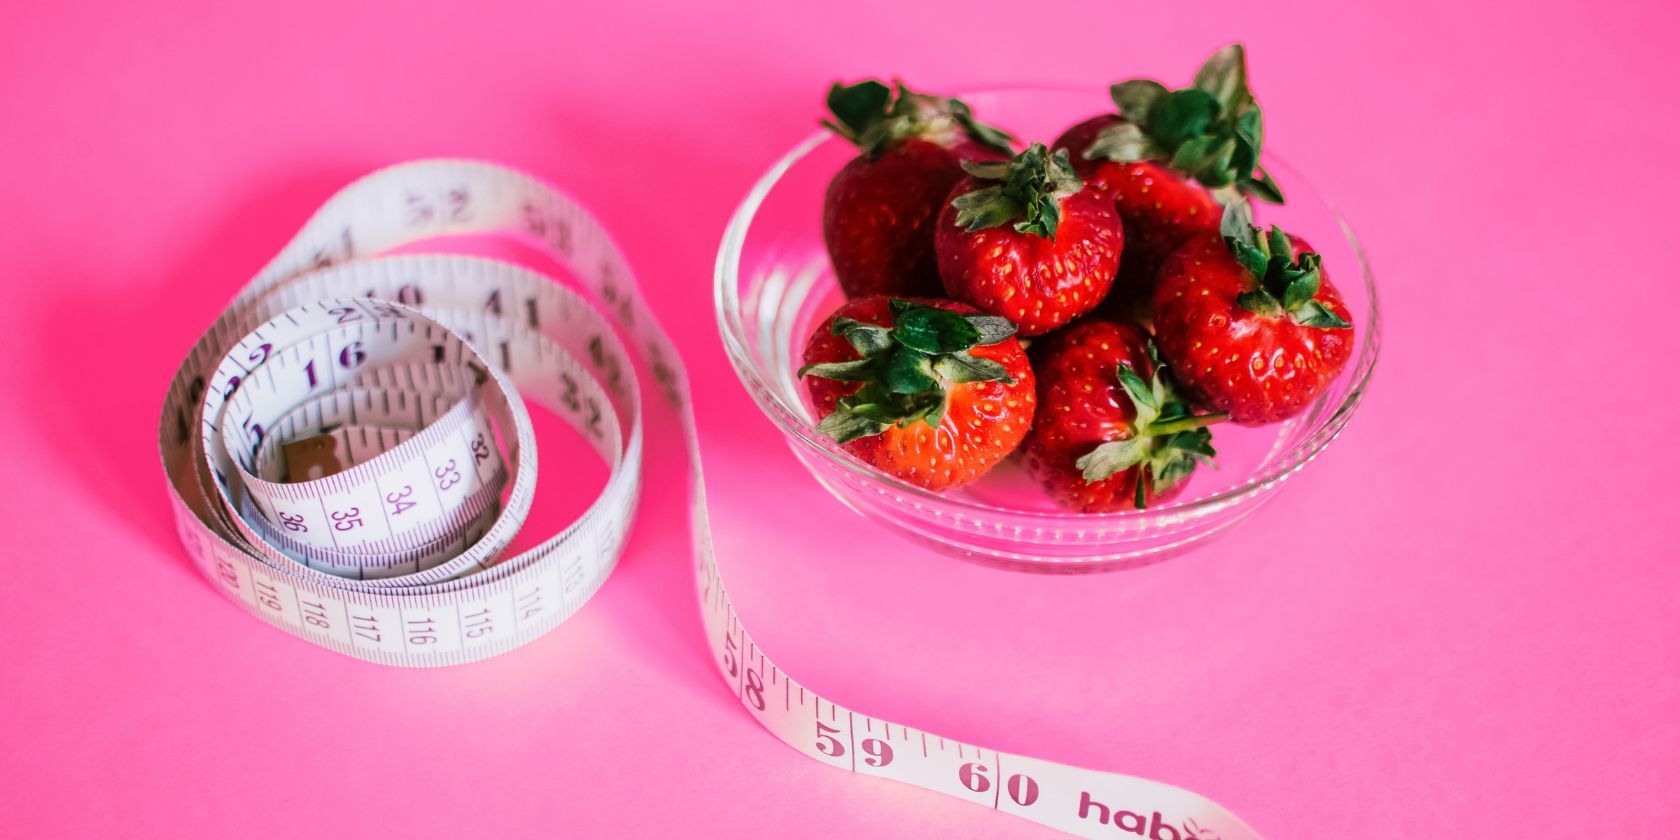 Waist measuring tape and bowl of strawberries on pink background